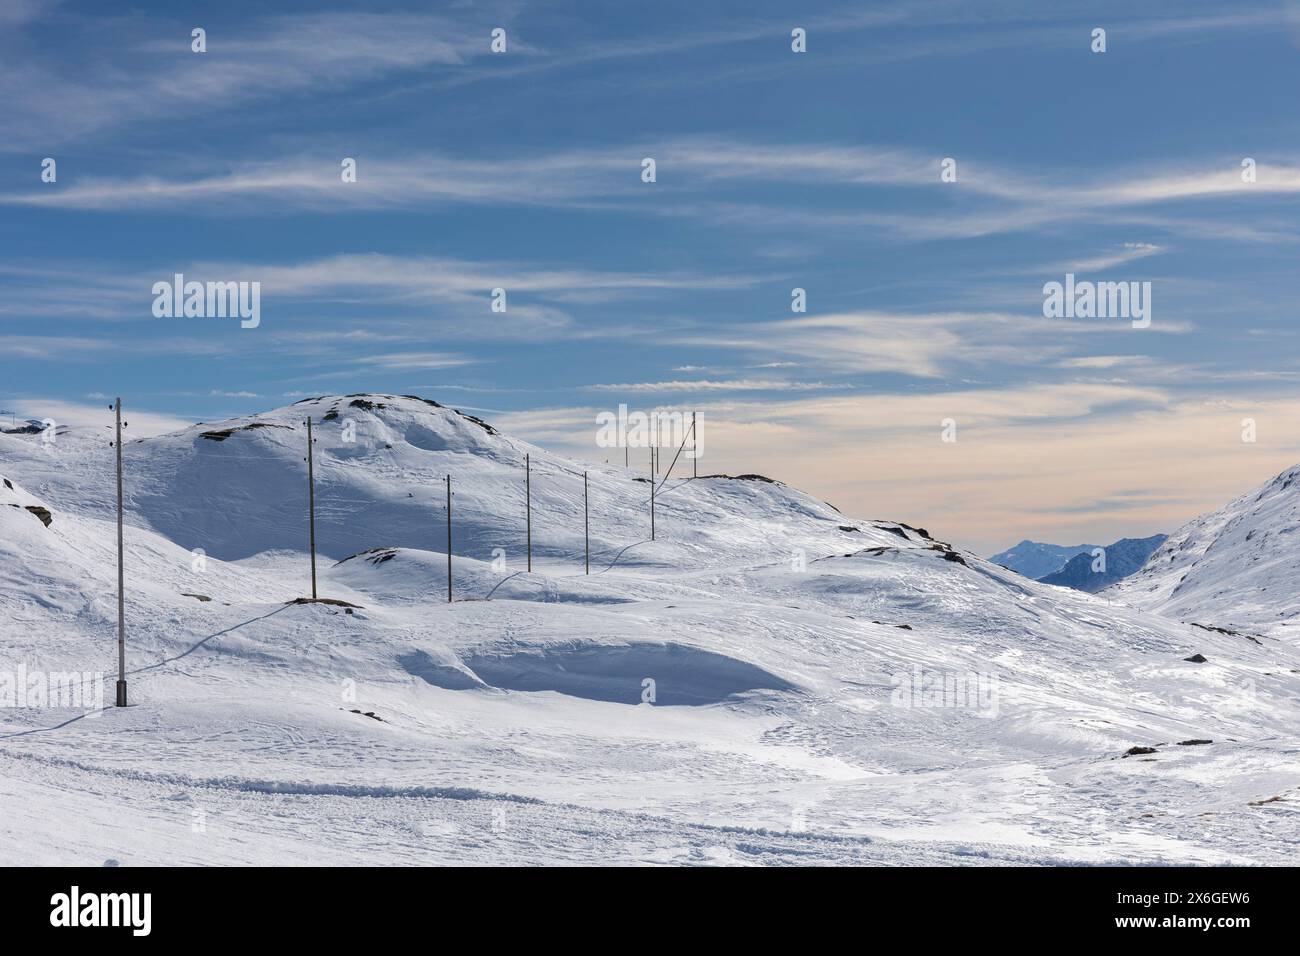 Spectacular landscape of the Bernina Pass in Switzerland on a winter day with lots of sunshine. All the mountains are covered with a lot of snow. Nobo Stock Photo